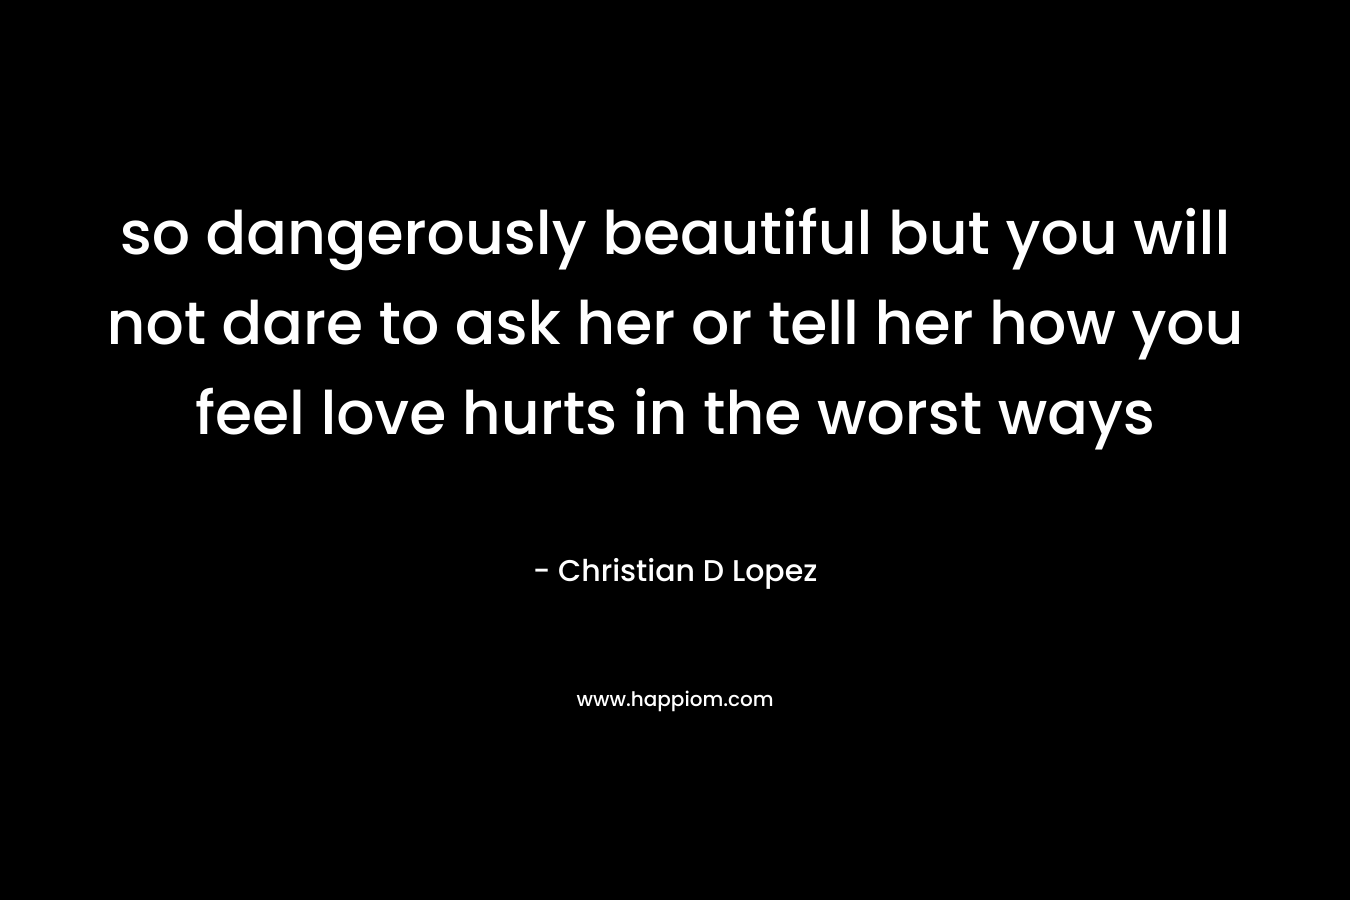 so dangerously beautiful but you will not dare to ask her or tell her how you feel love hurts in the worst ways – Christian D Lopez